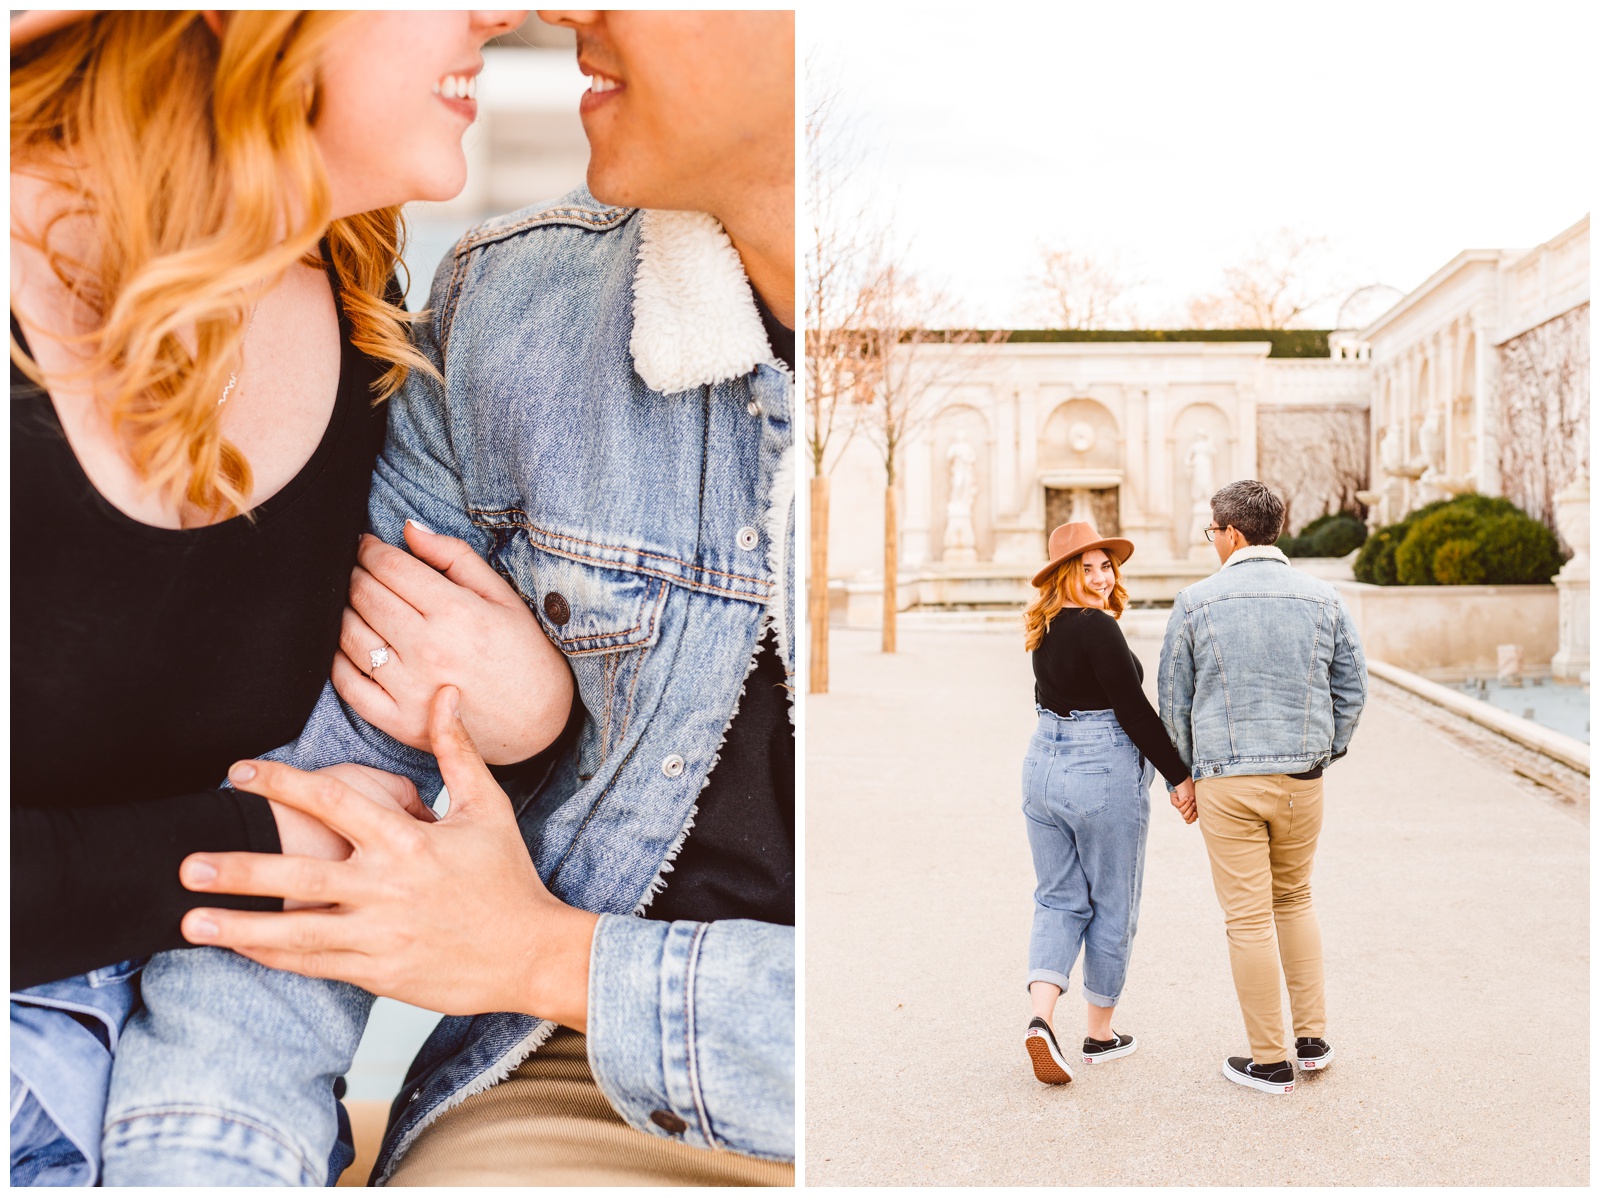 Longwood Gardens Stylish and Romantic Engagement Session - Pennsylvania Weddings - Brooke Michelle Photography